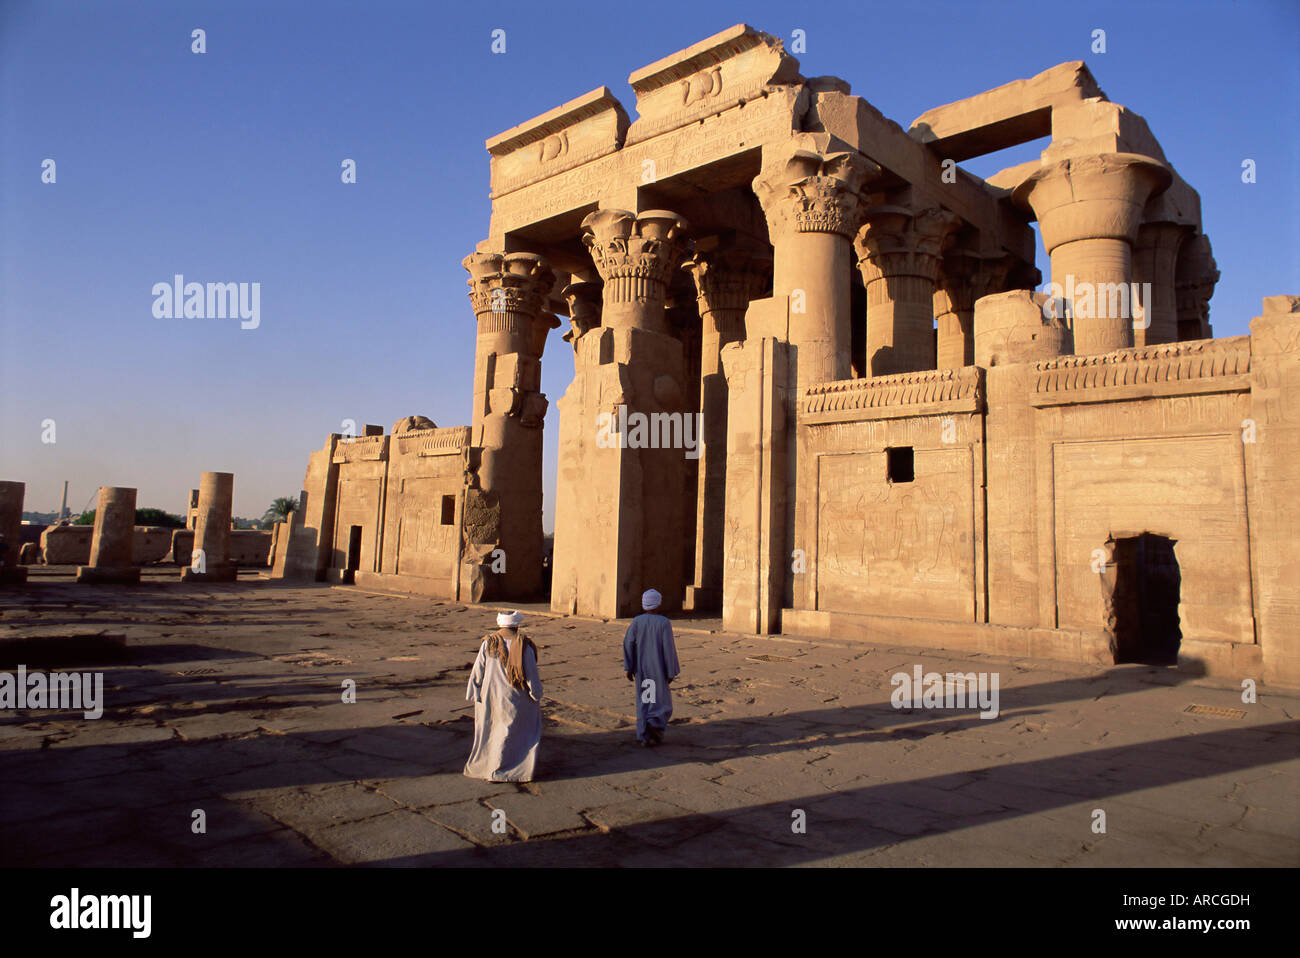 Forecourt and pylon, Temple of Sobek and Haroeris, archaeological site, Kom Ombo, Egypt, North Africa, Africa Stock Photo